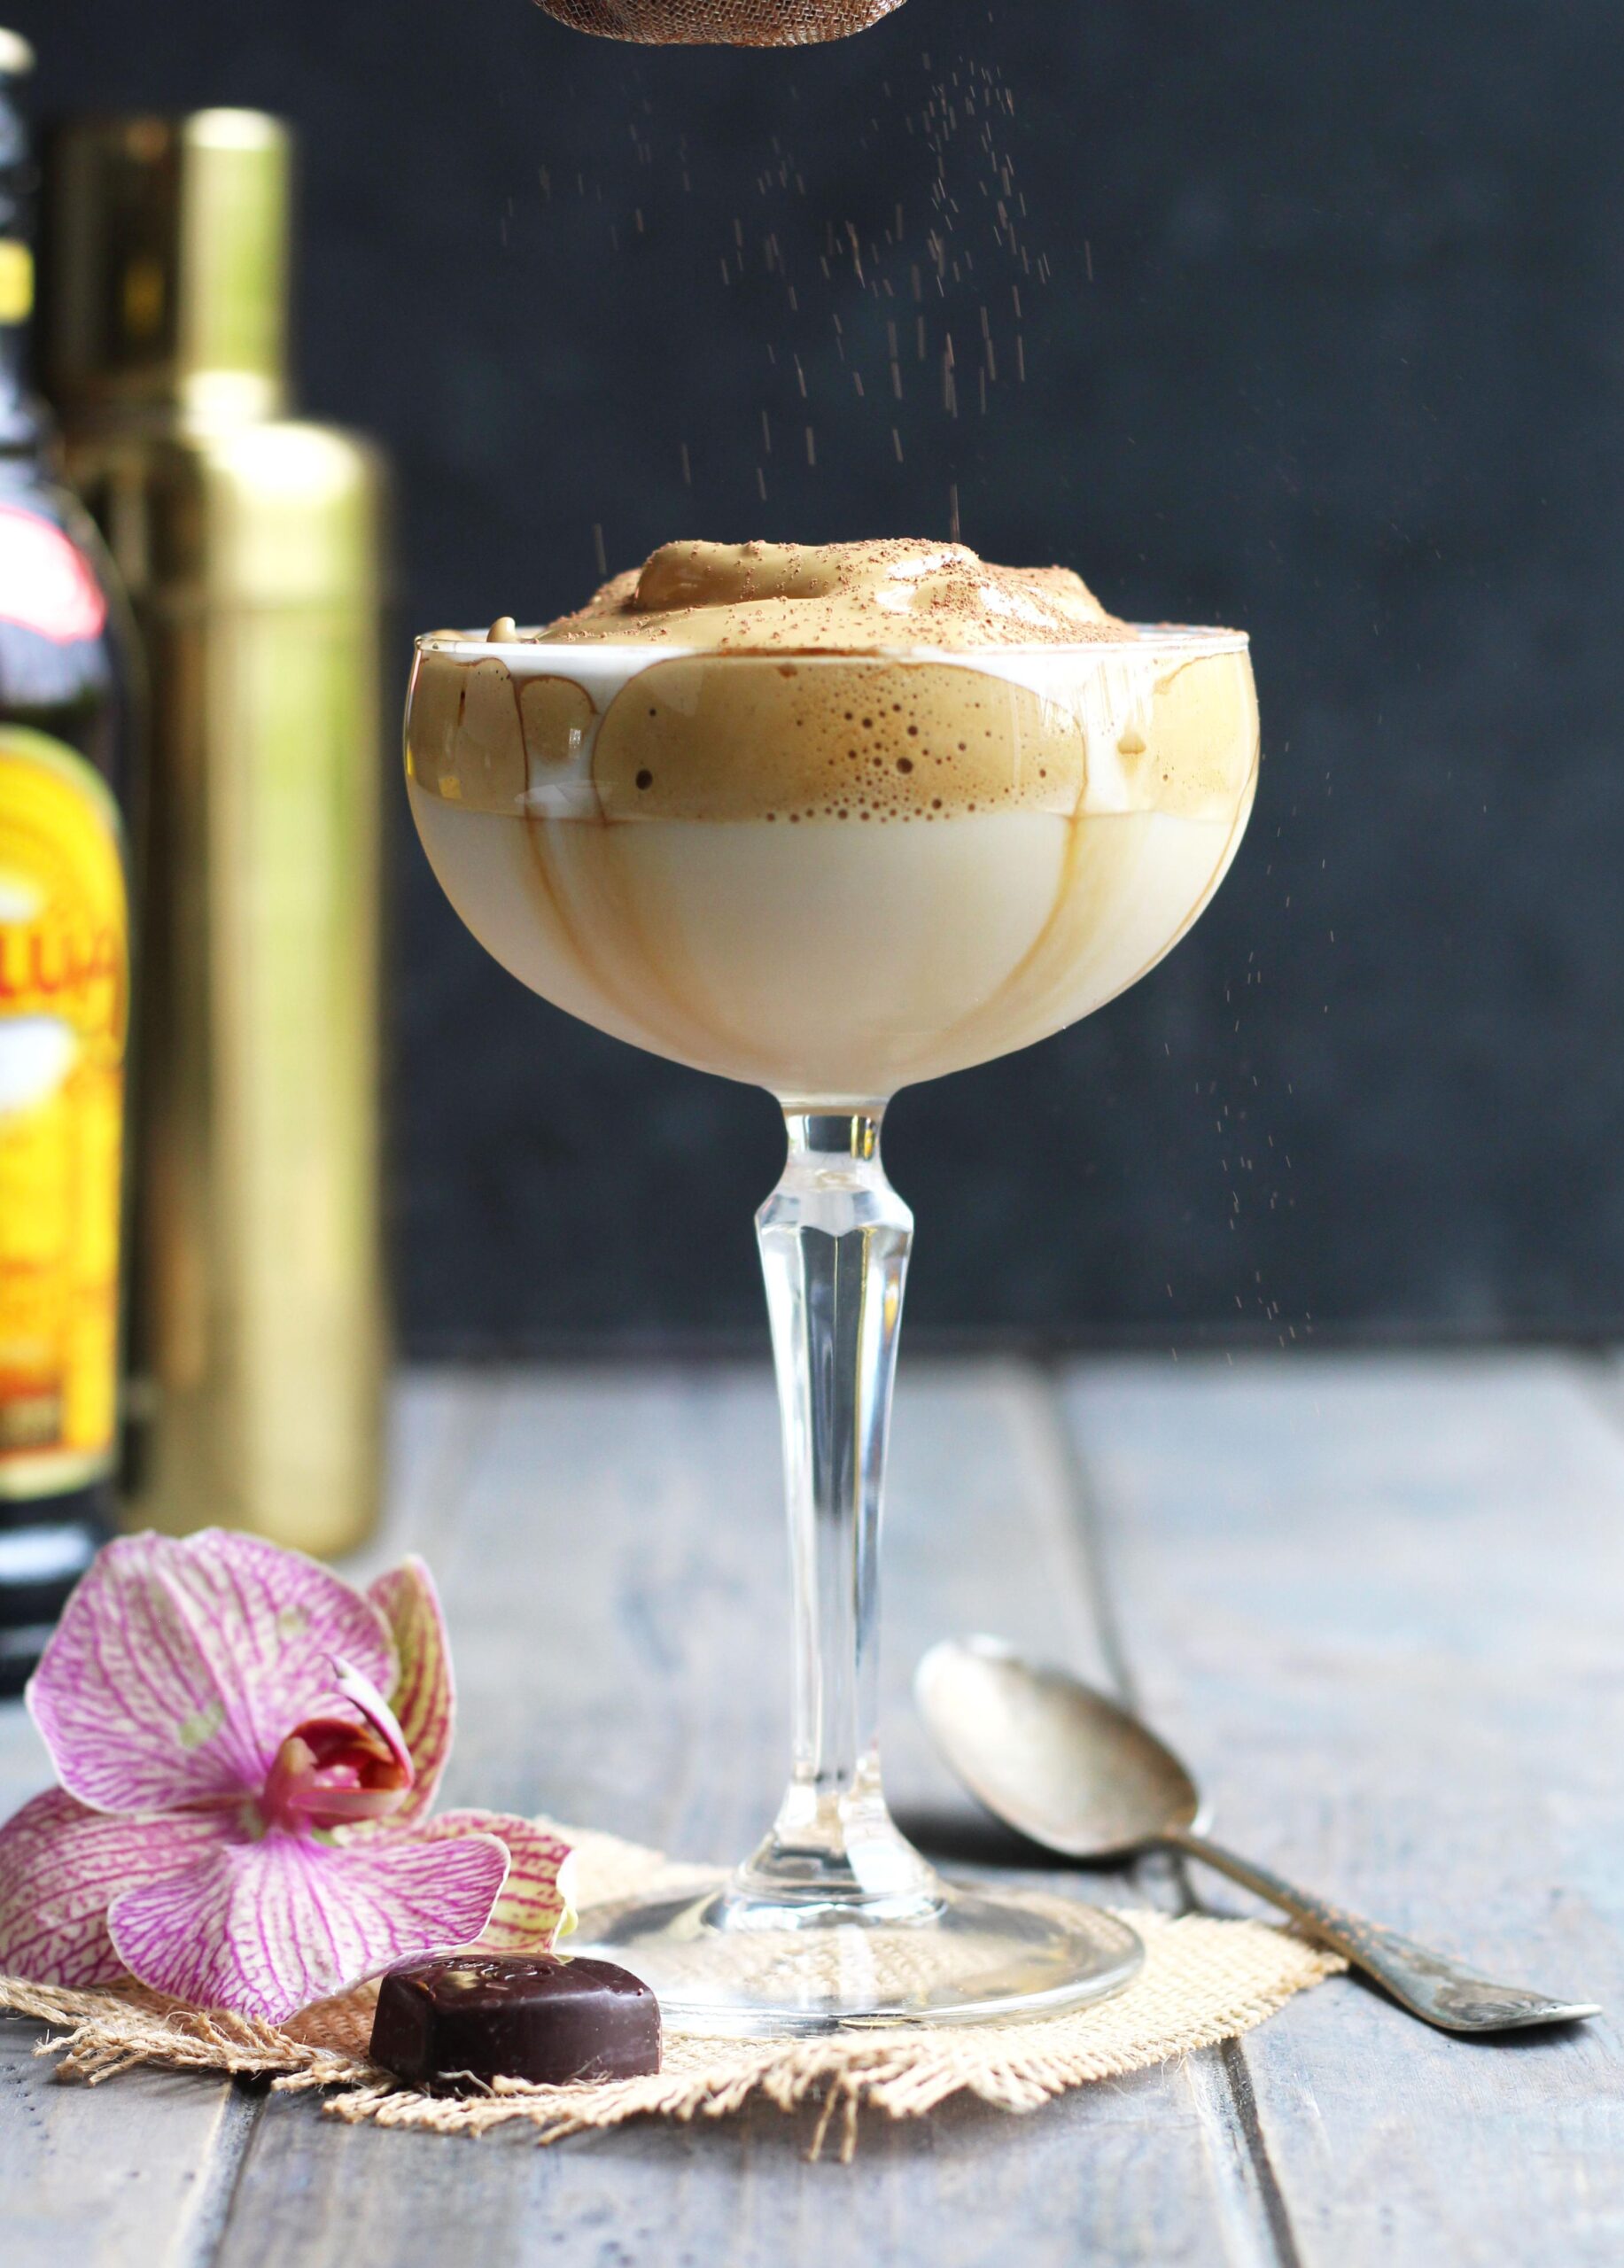  Sip in style with our whipped coffee martini!